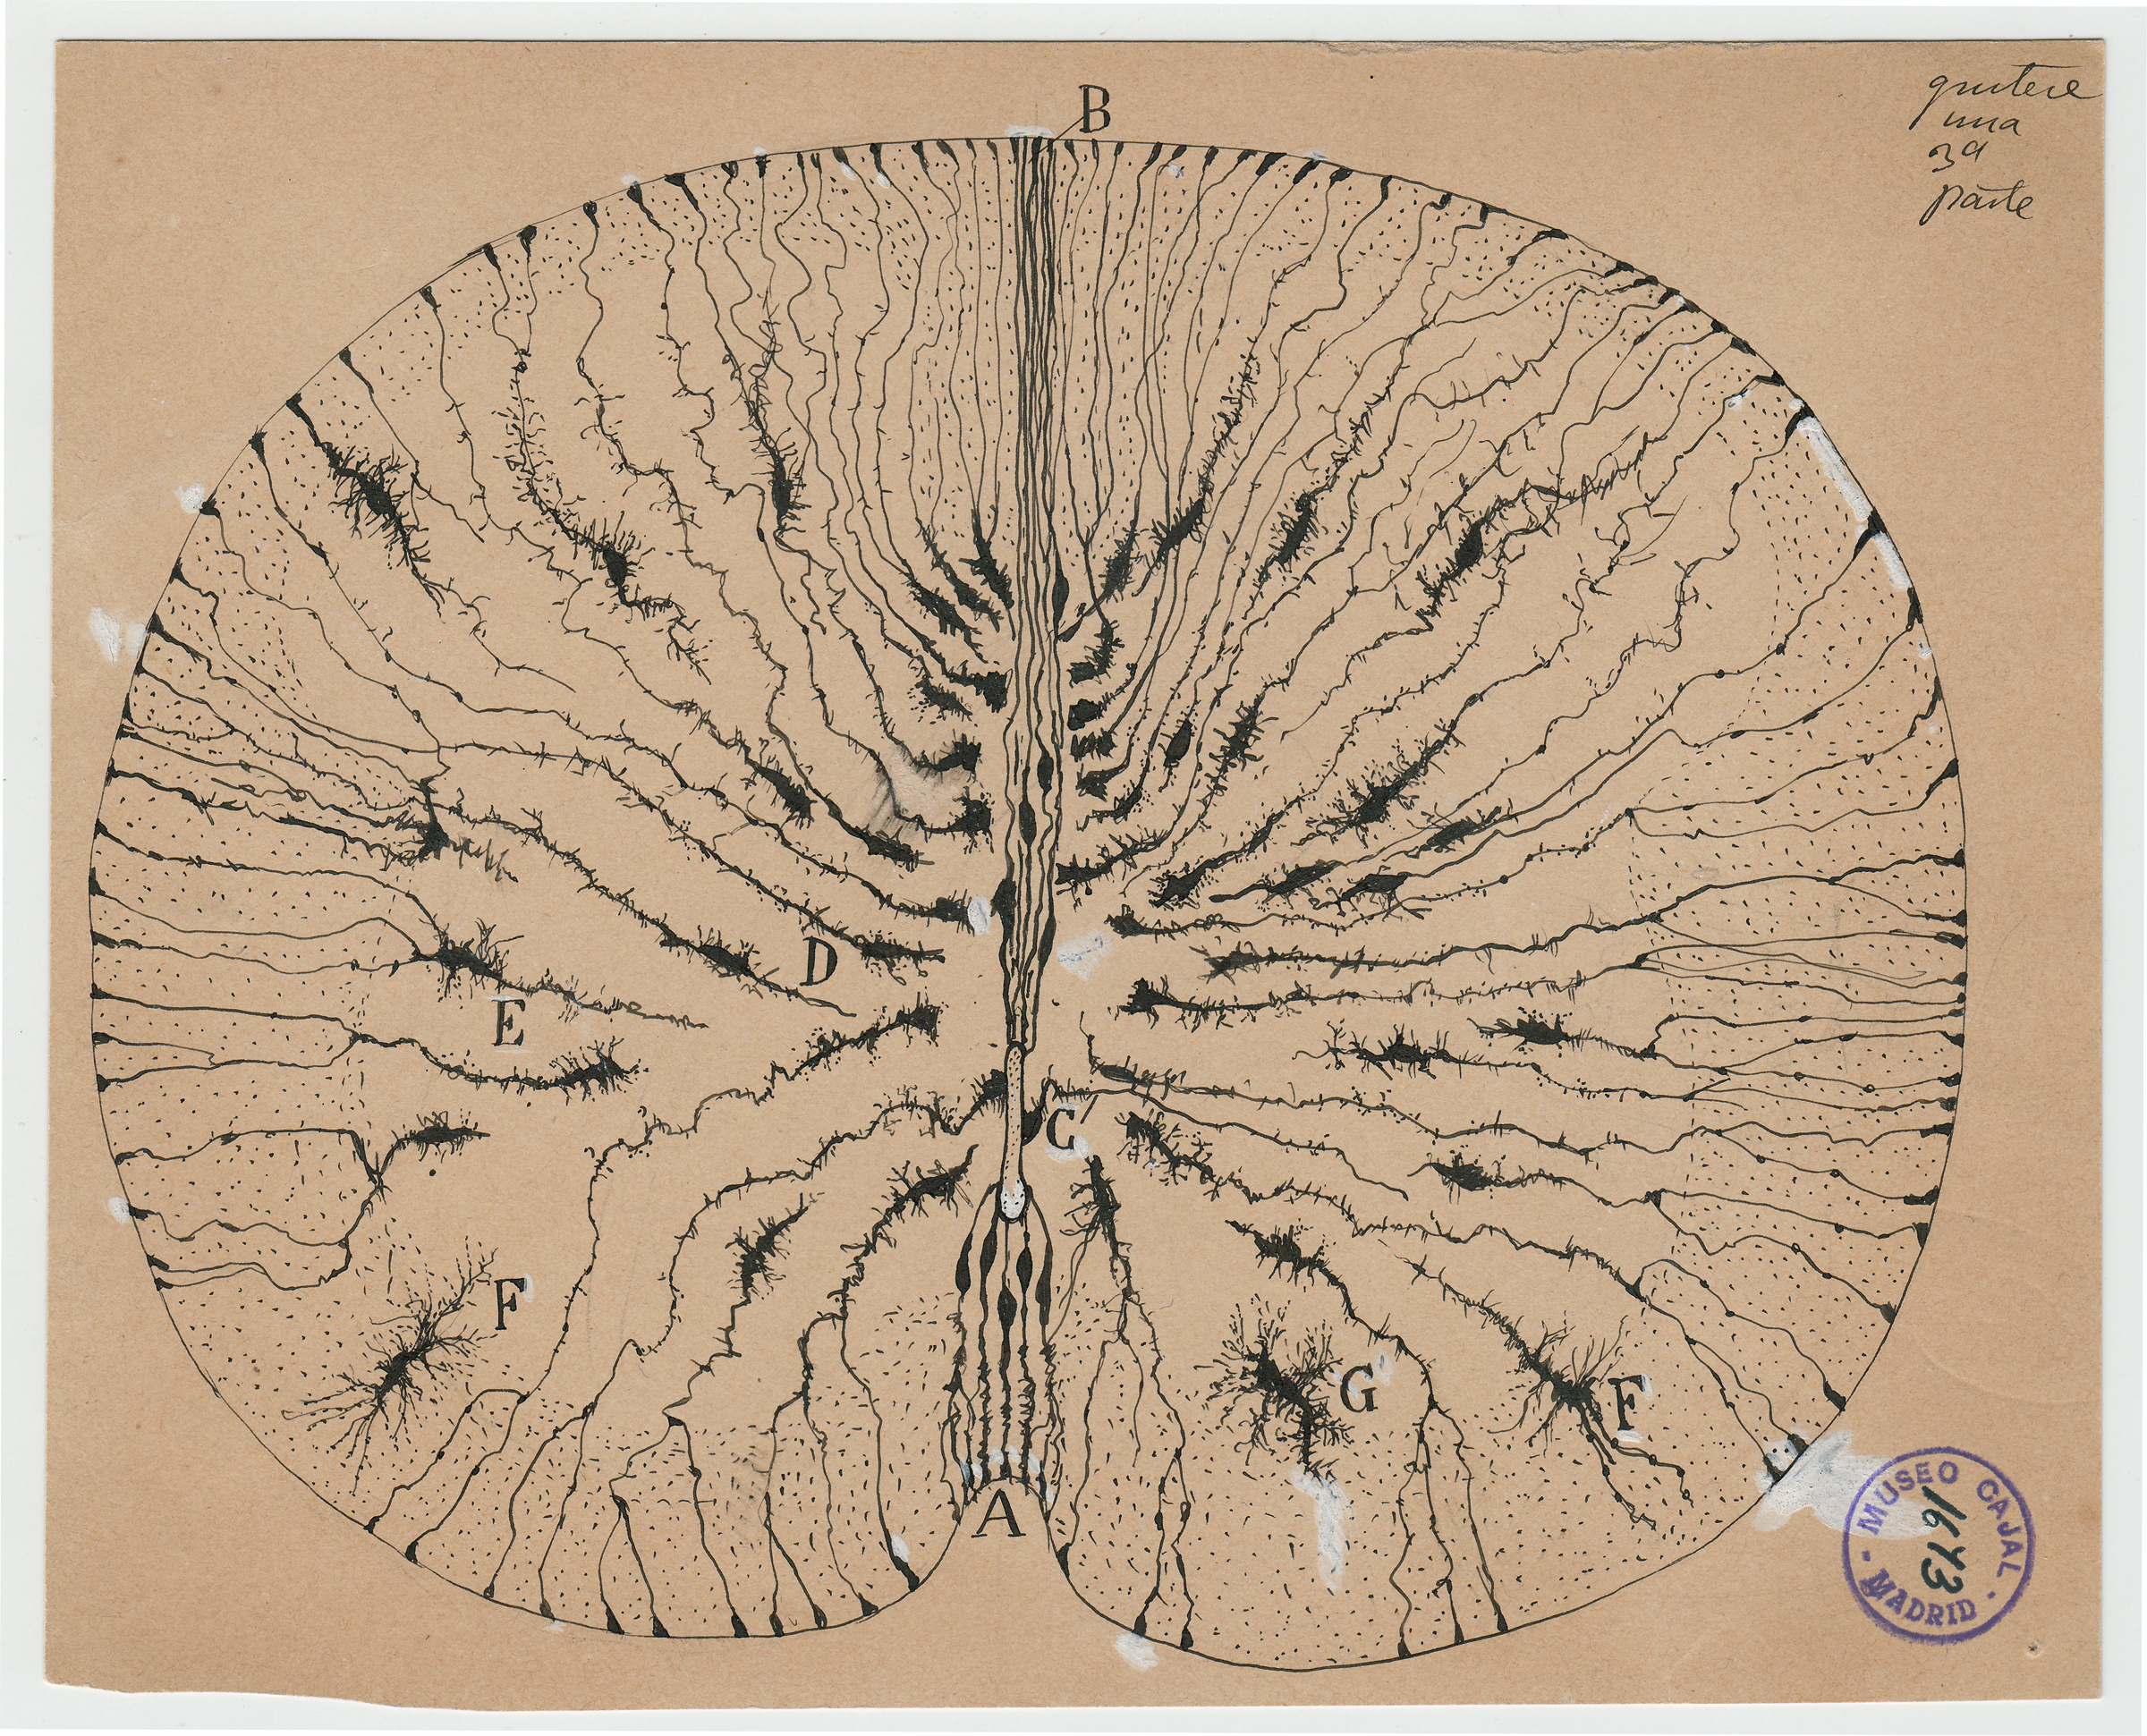 Santiago Ramón y Cajal, glial cells of the mouse spinal cord, 1899, ink and pencil on paper. Courtesy of Instituto Cajal (CSIC).